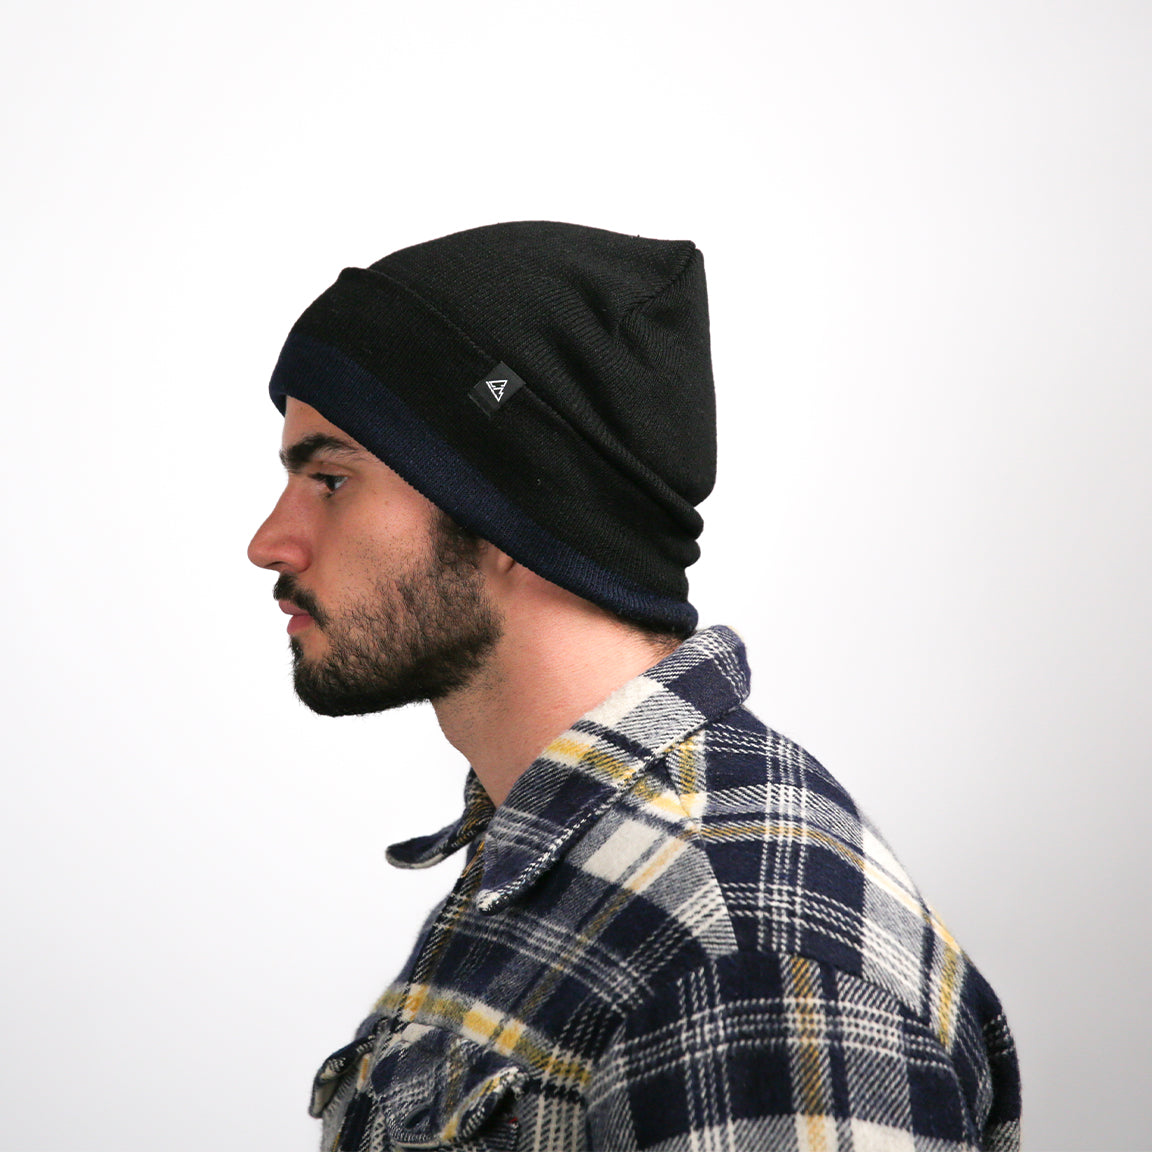 Seen from the side, the man’s beanie is bunched at the back, suggesting a relaxed fit. The shirt's plaid pattern, with large squares, is noticeable, and the shirt's thick fabric folds naturally at the elbow. His profile is calm, with a straight nose and a slightly open mouth.